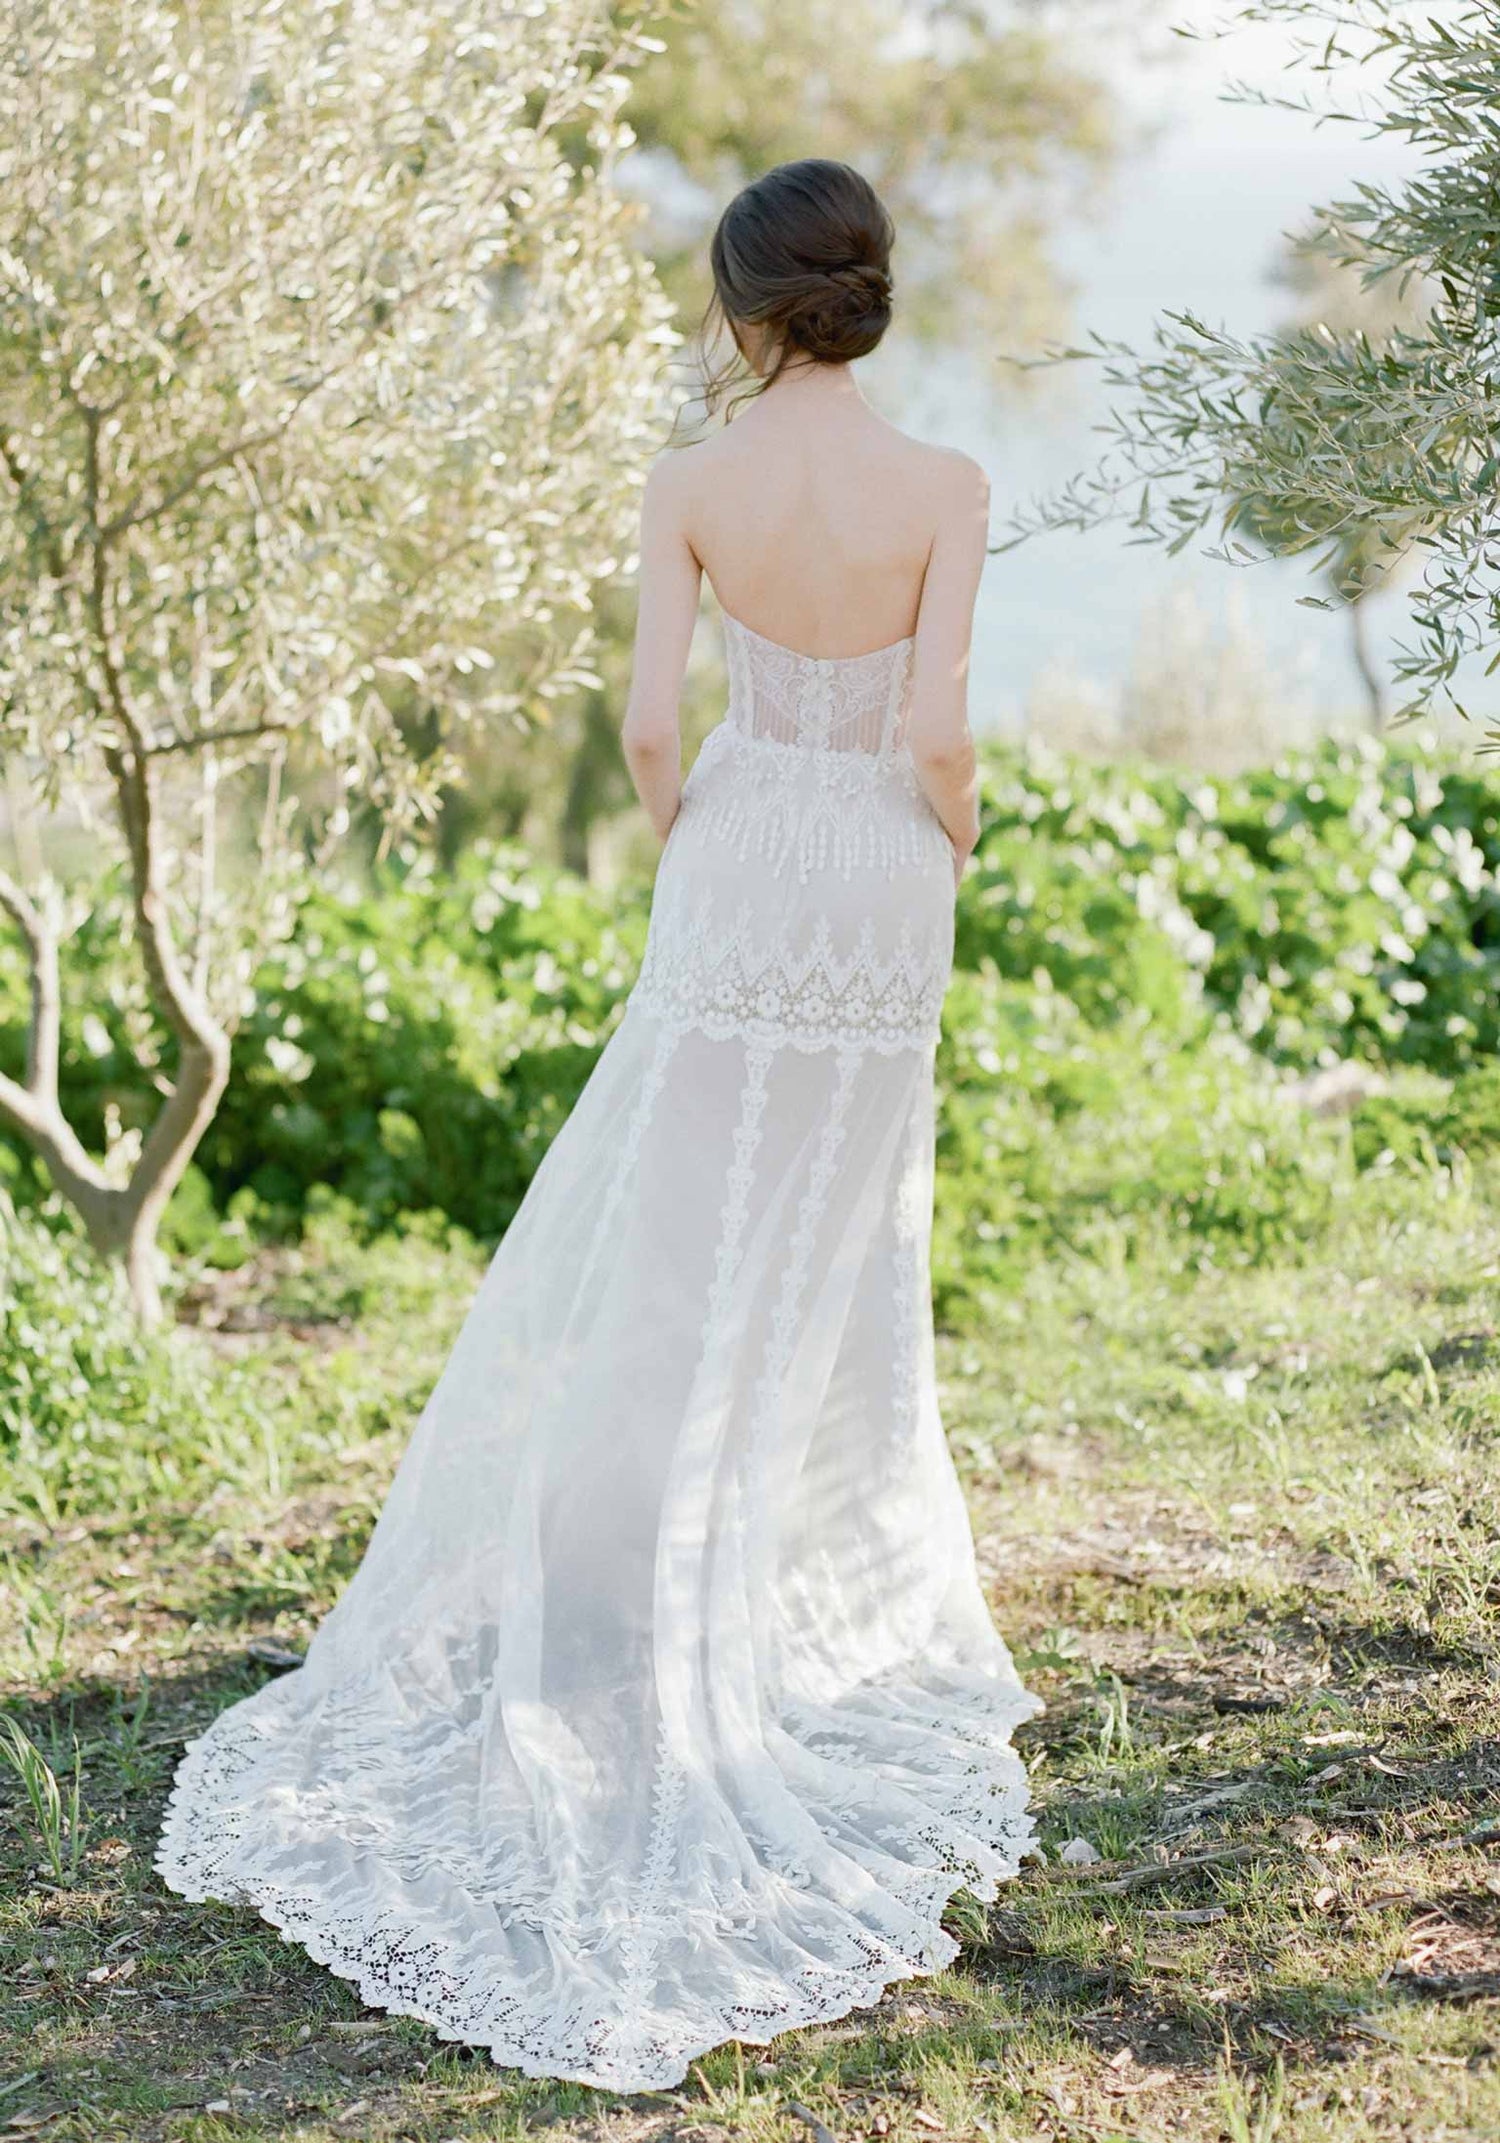 Strapless A-Line Wedding Dress with Garden-Inspired Lace